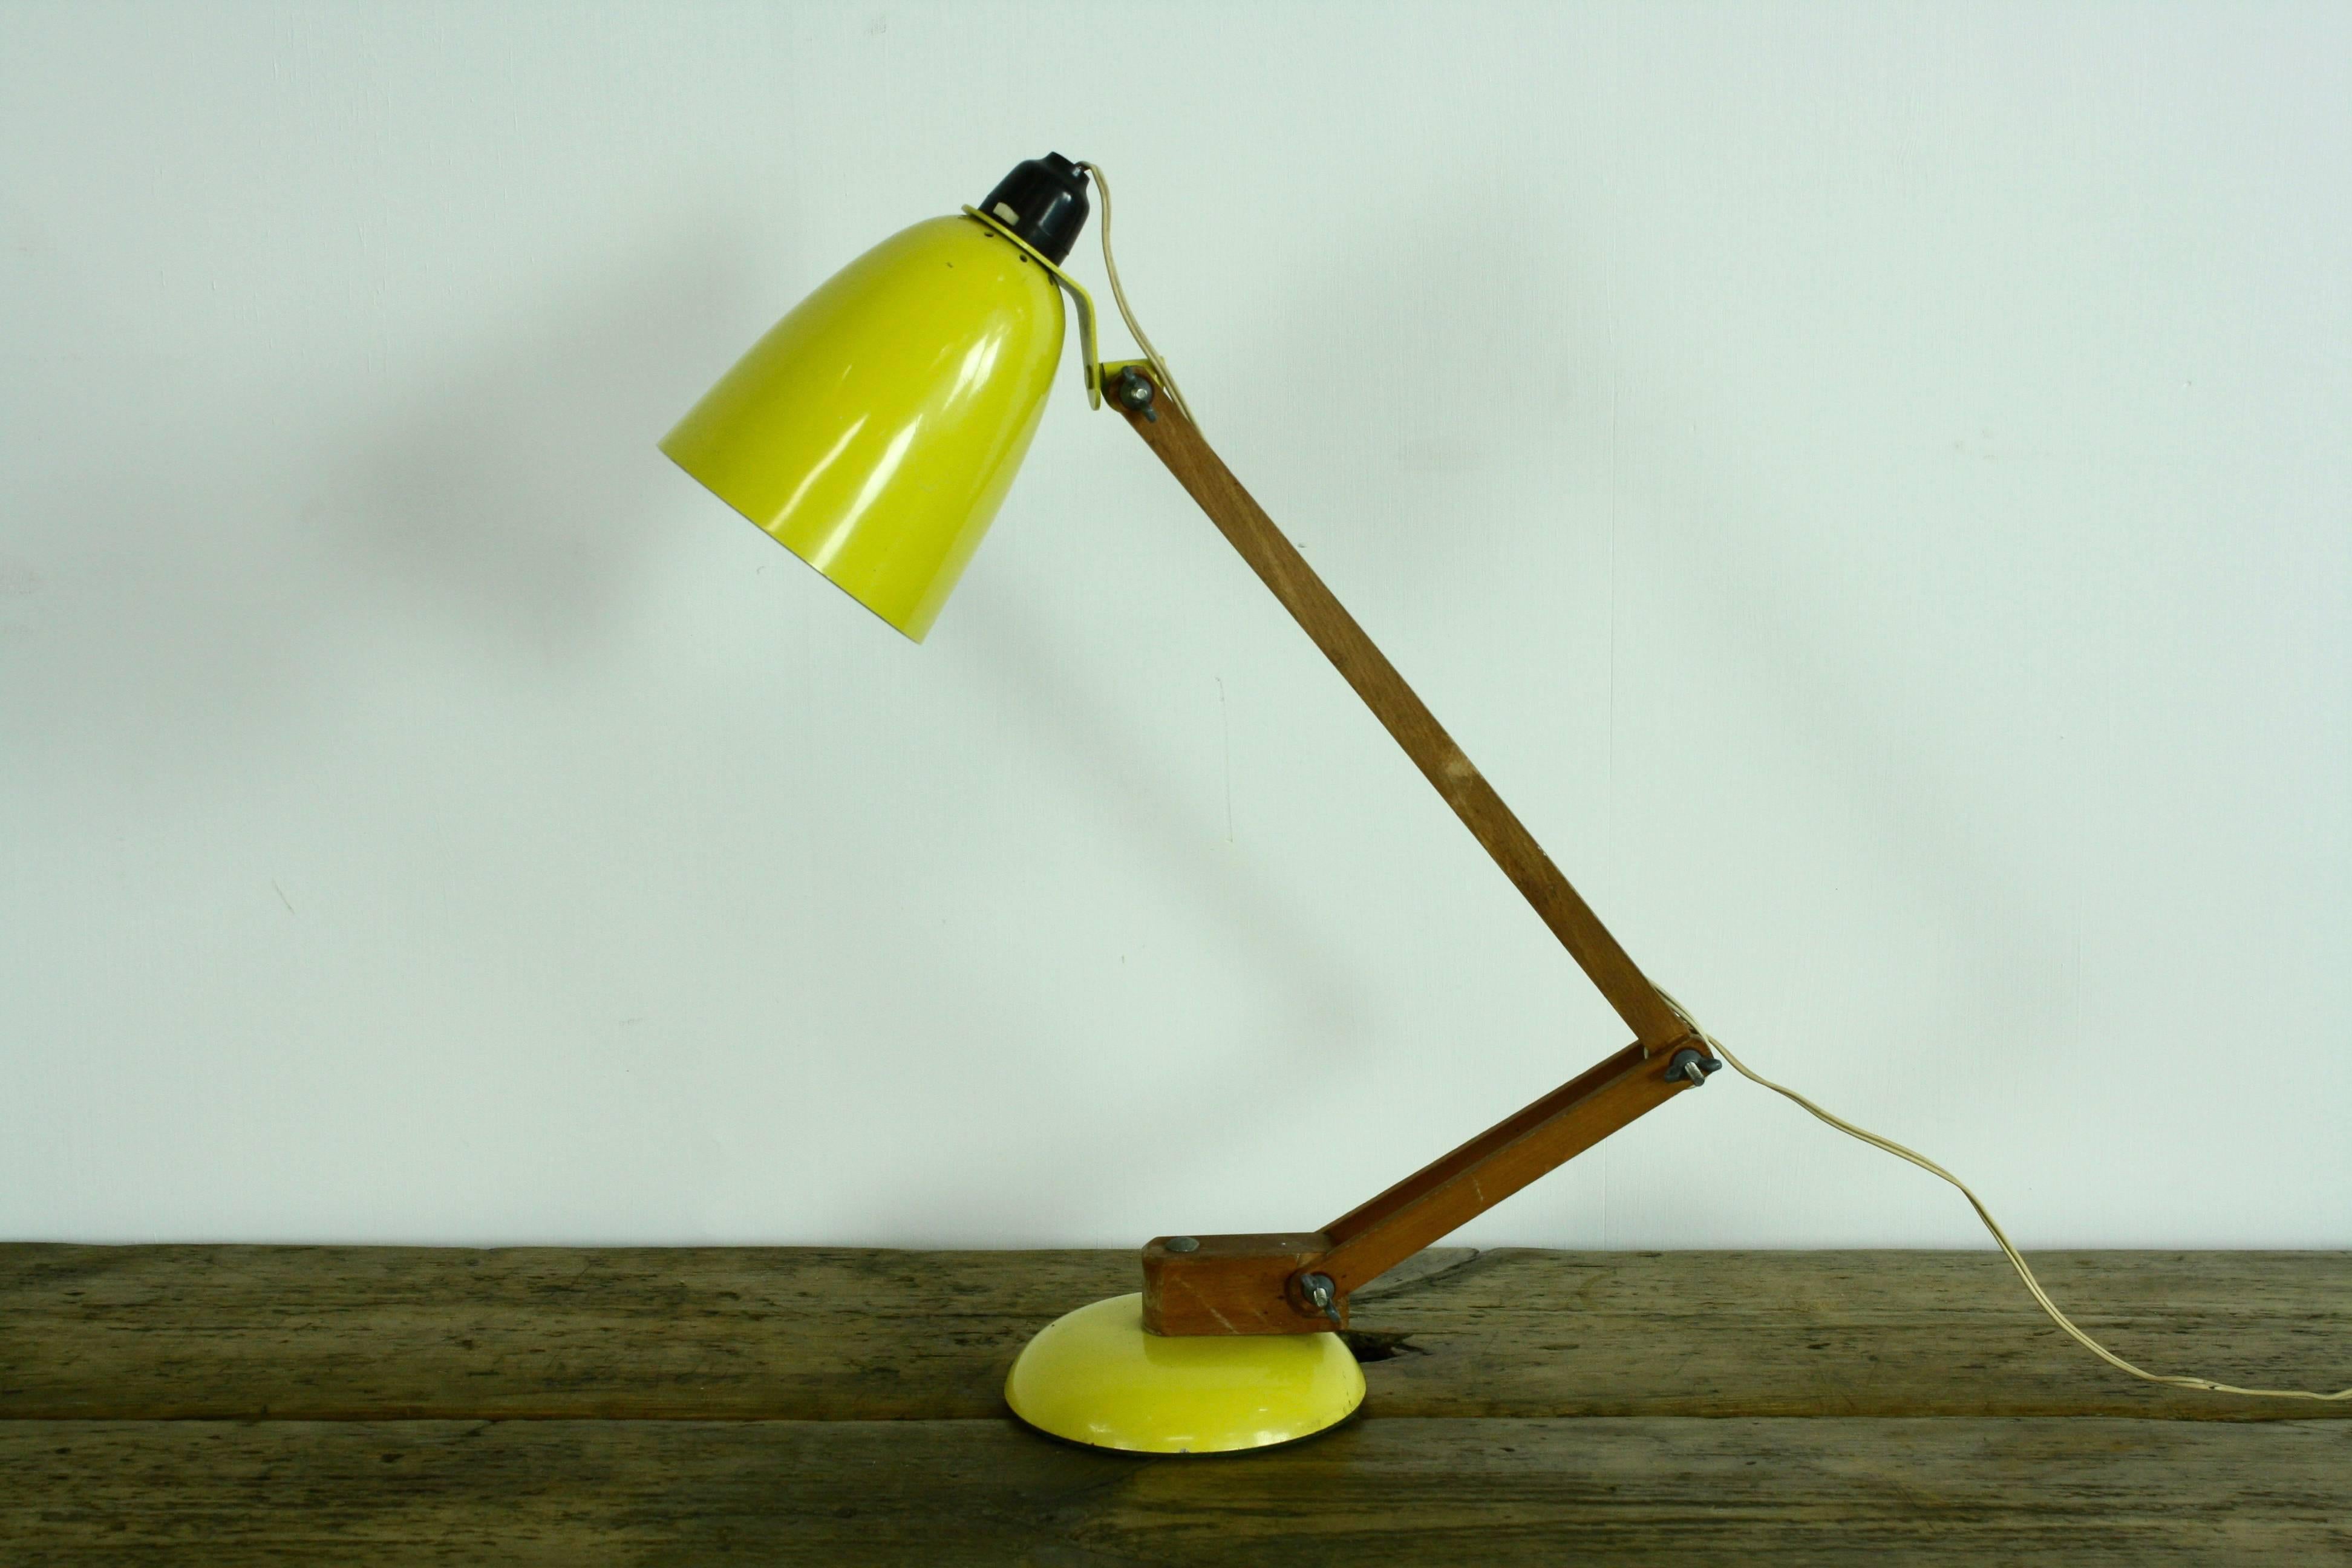 British Vintage Mid-Century Maclamp Anglepoise Lamp in Yellow Designed by Terence Conran